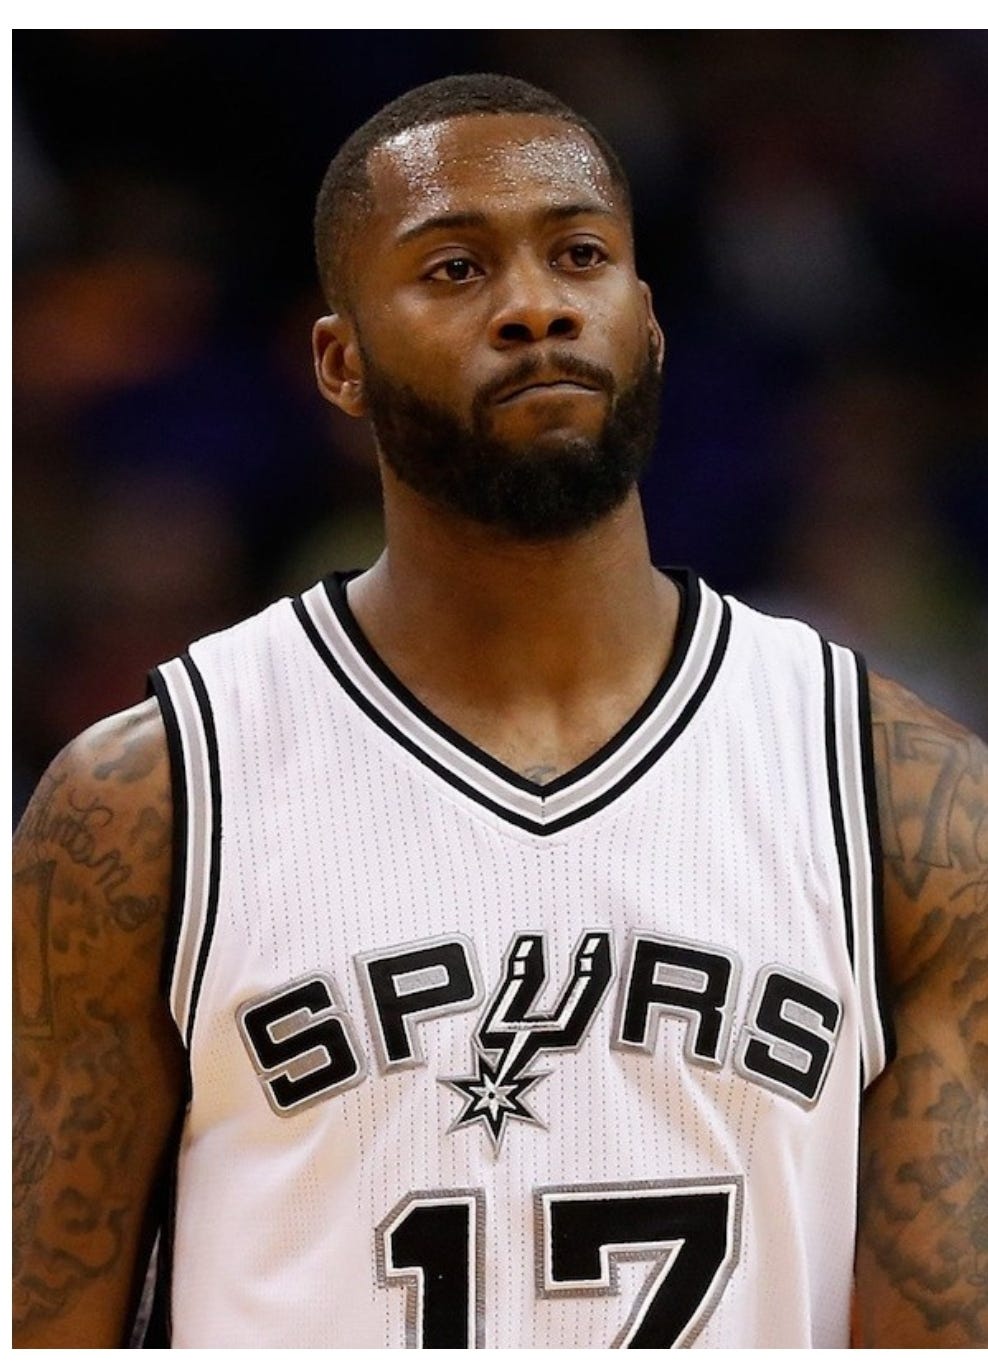 With Kawhi Leonard out, only Jonathon Simmons shows up for Spurs